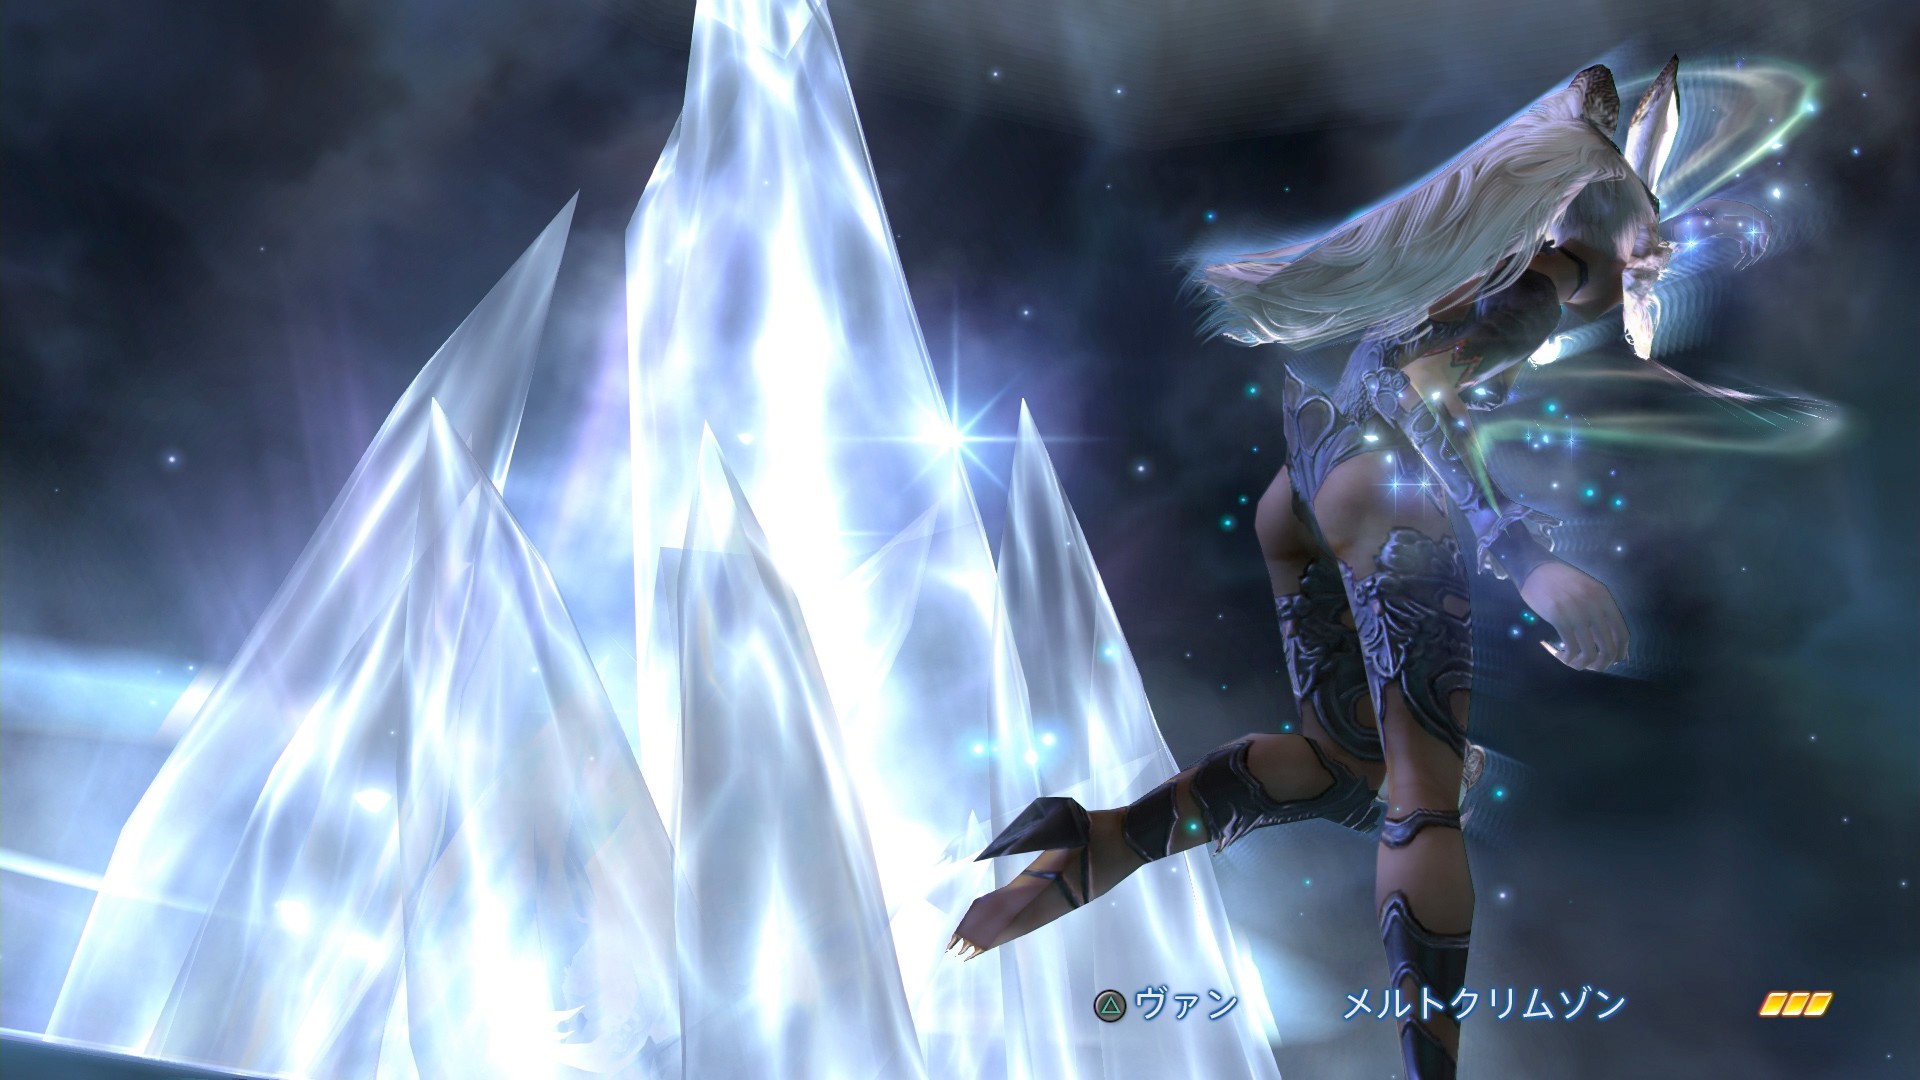 That S What We Re Here For Final Fantasy Xii The Zodiac Age Quickening Hd Wallpaper Backgrounds Download